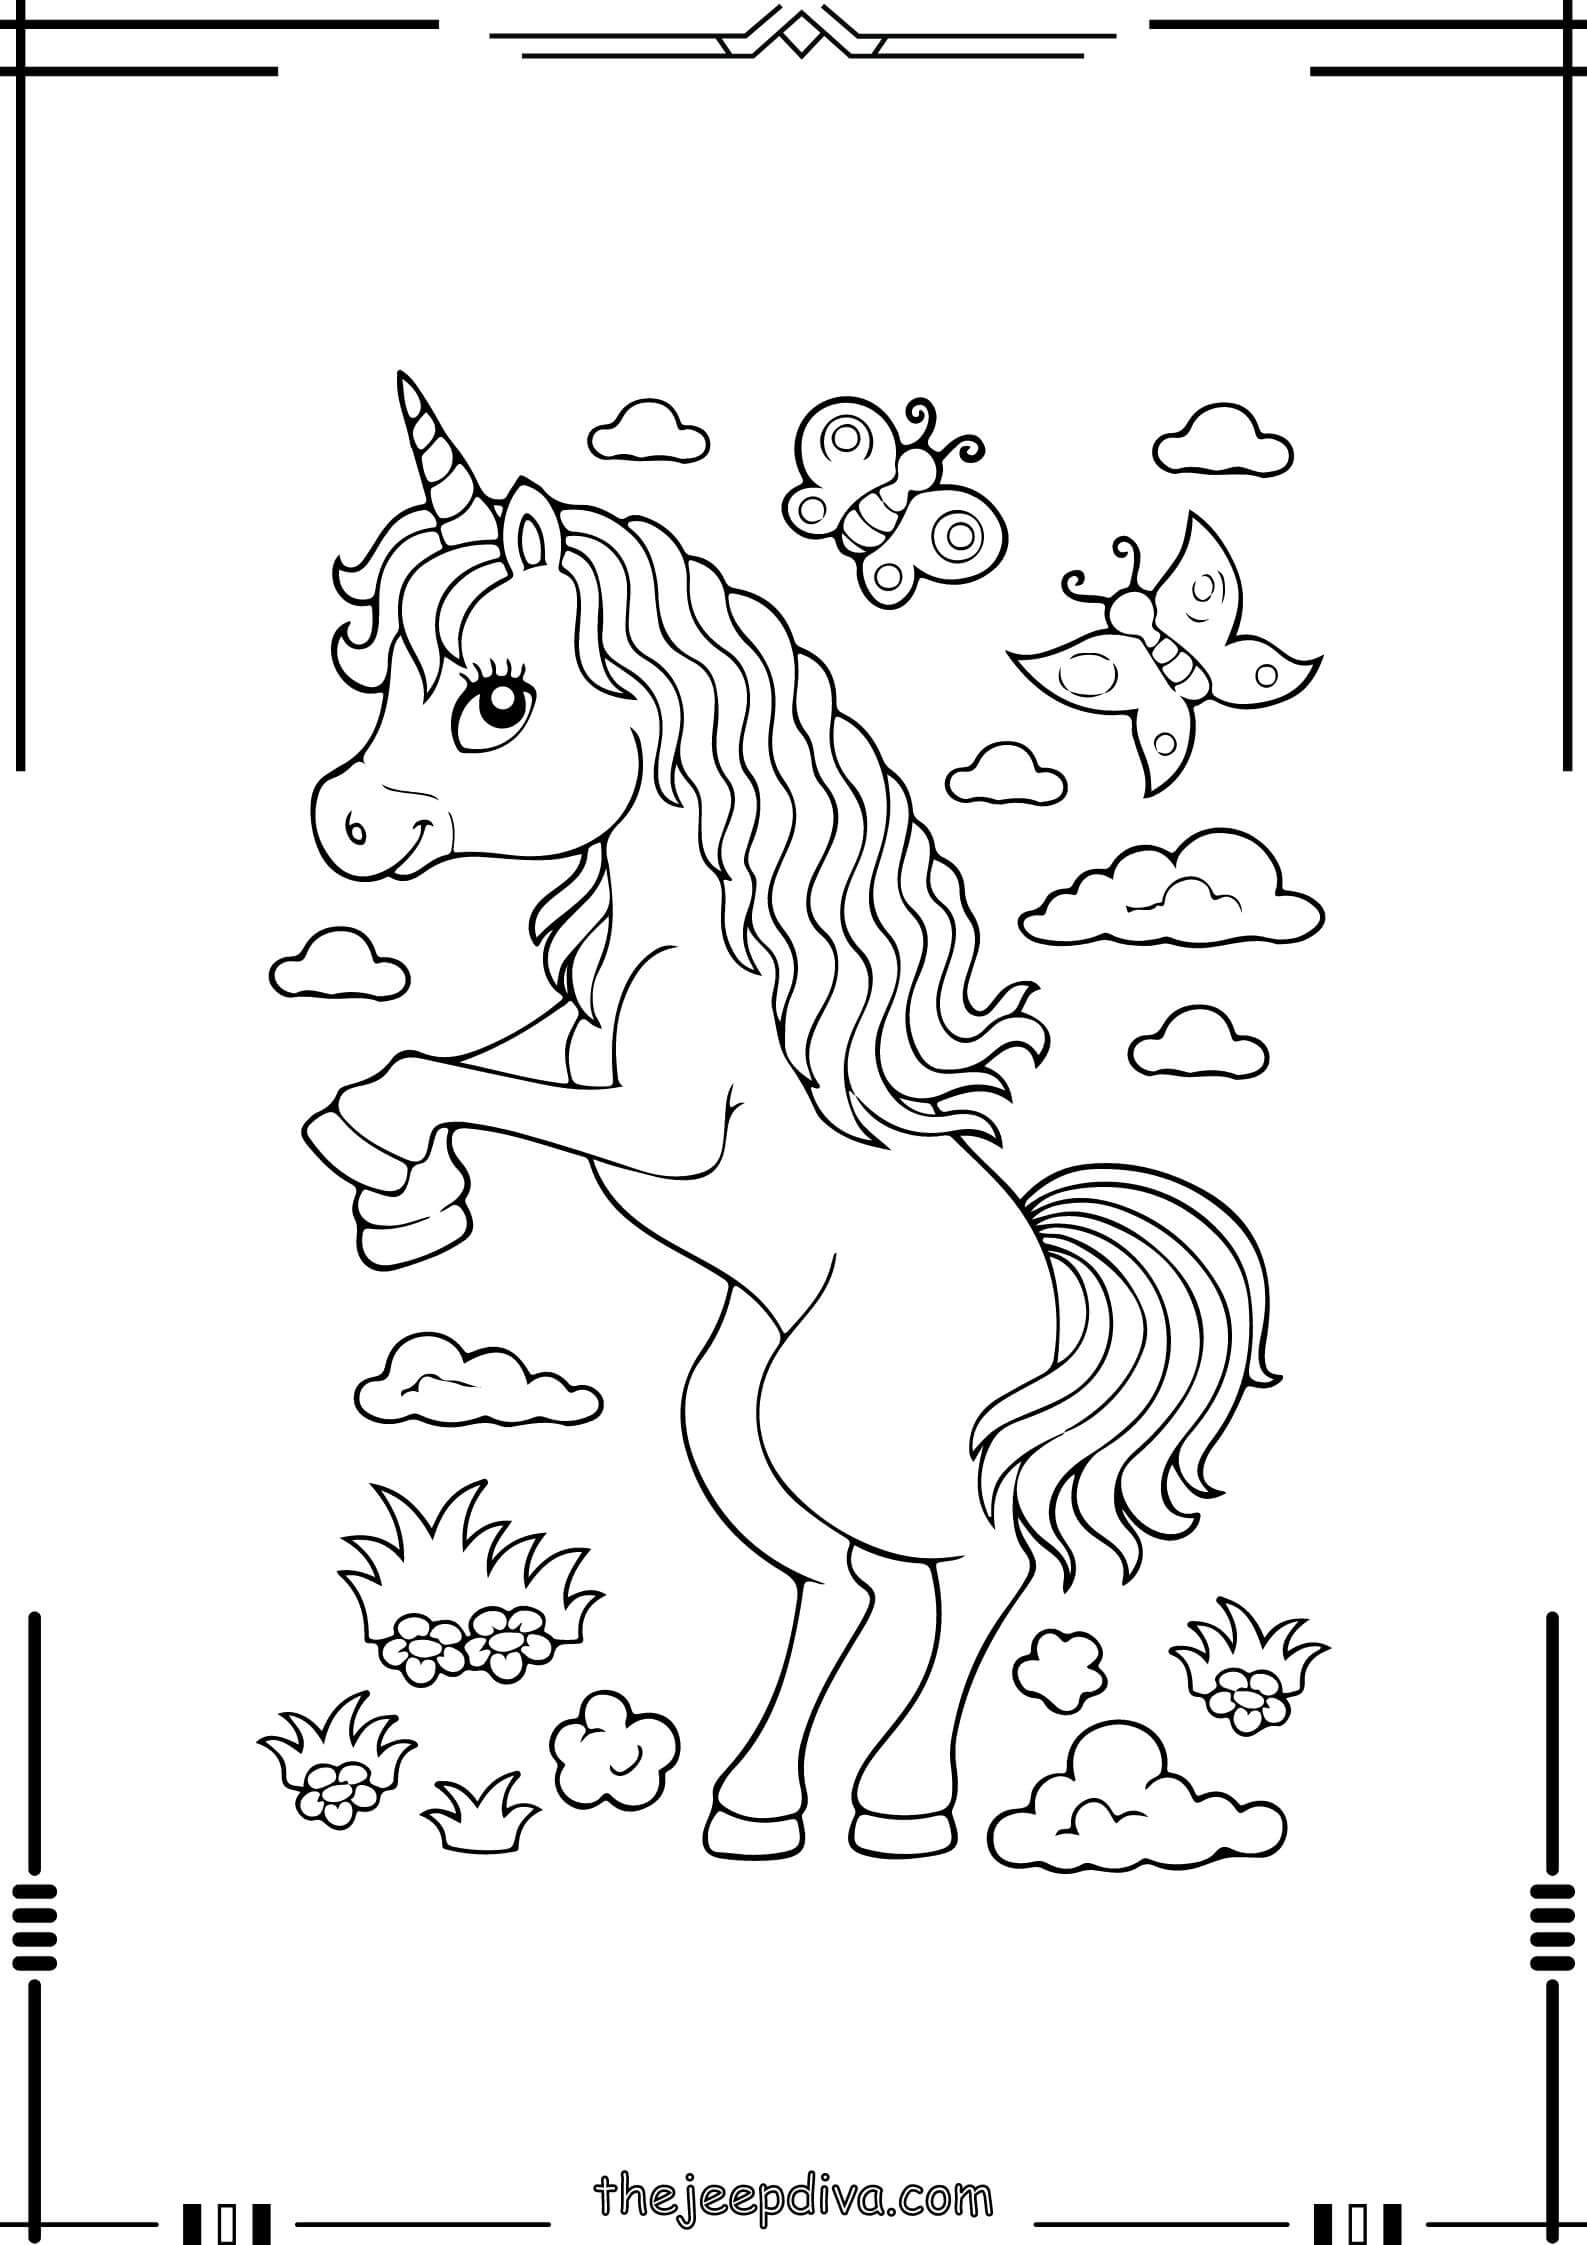 unicorn-coloring-page-easy-16